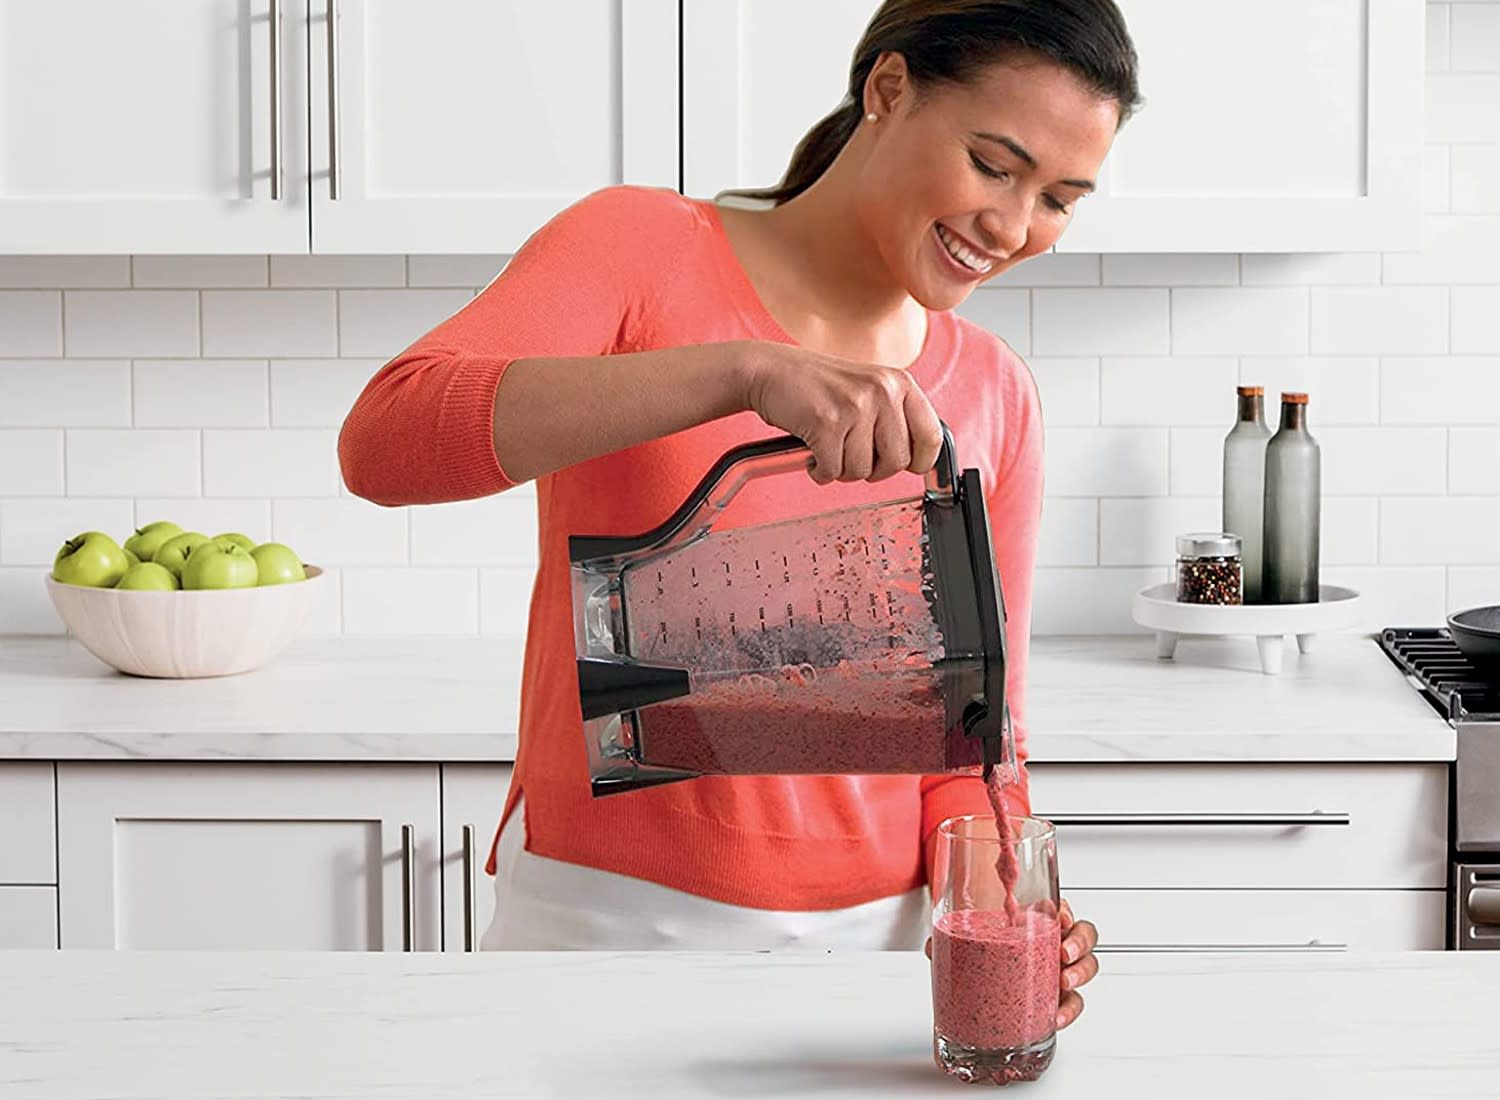 Save 20% on This Ninja Blender That's Perfect For Making Healthy 'Nice Cream 